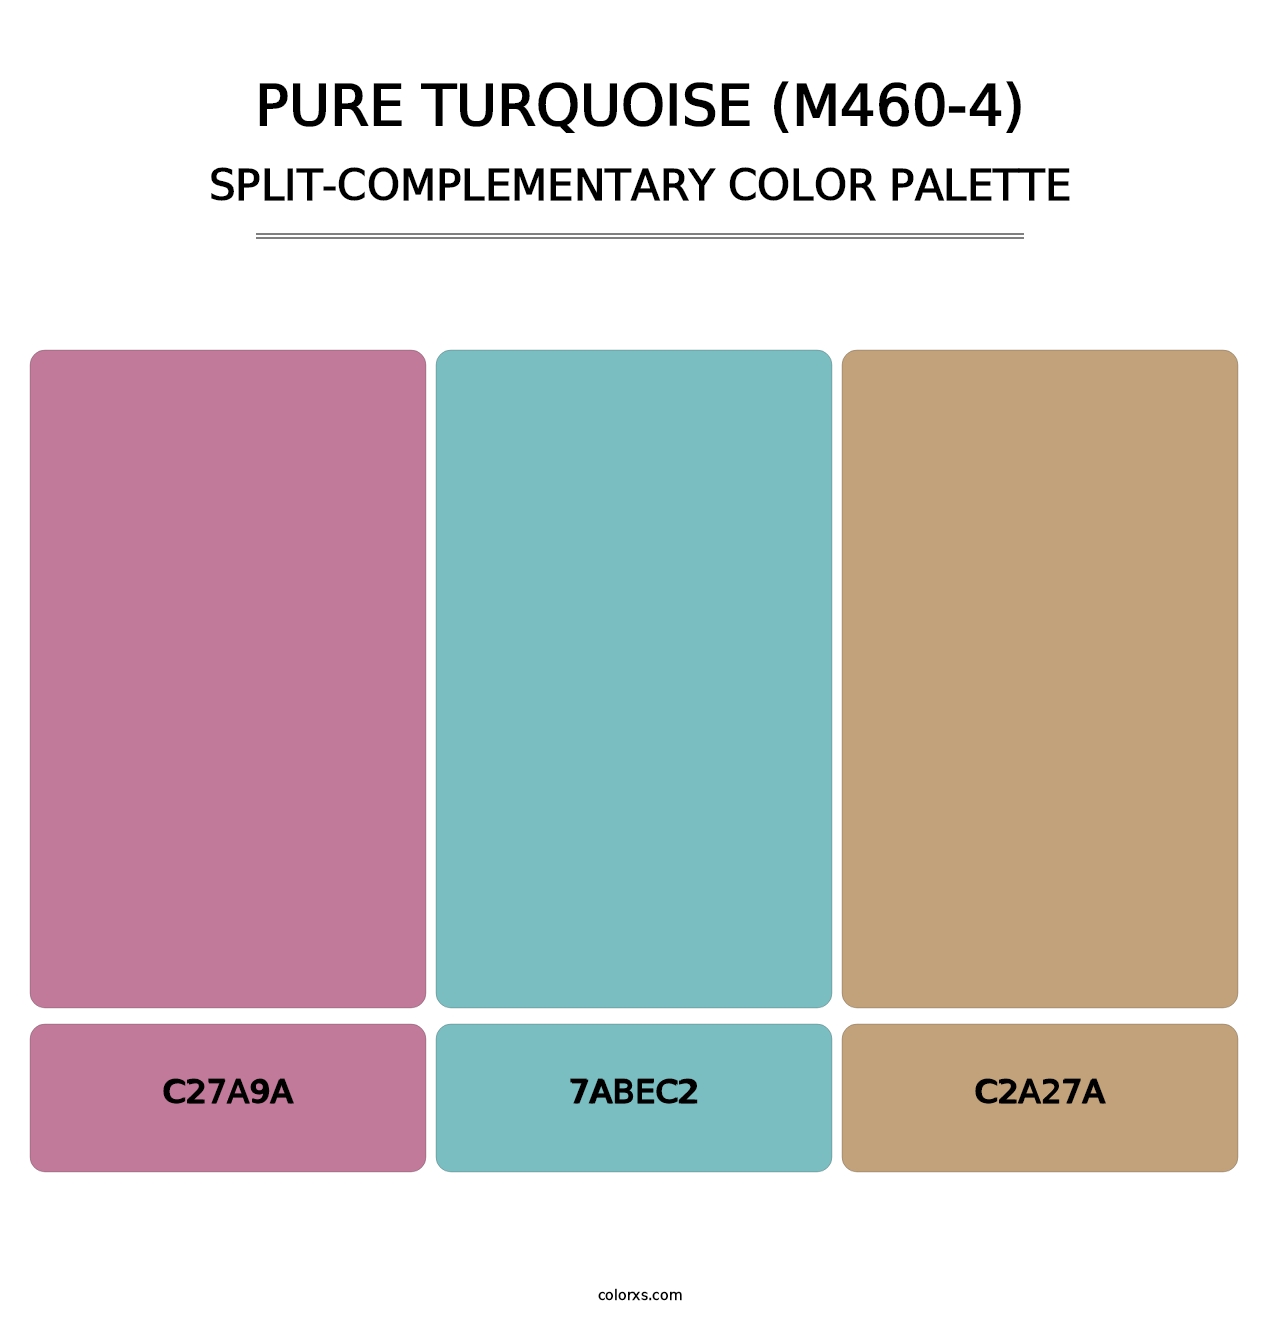 Pure Turquoise (M460-4) - Split-Complementary Color Palette